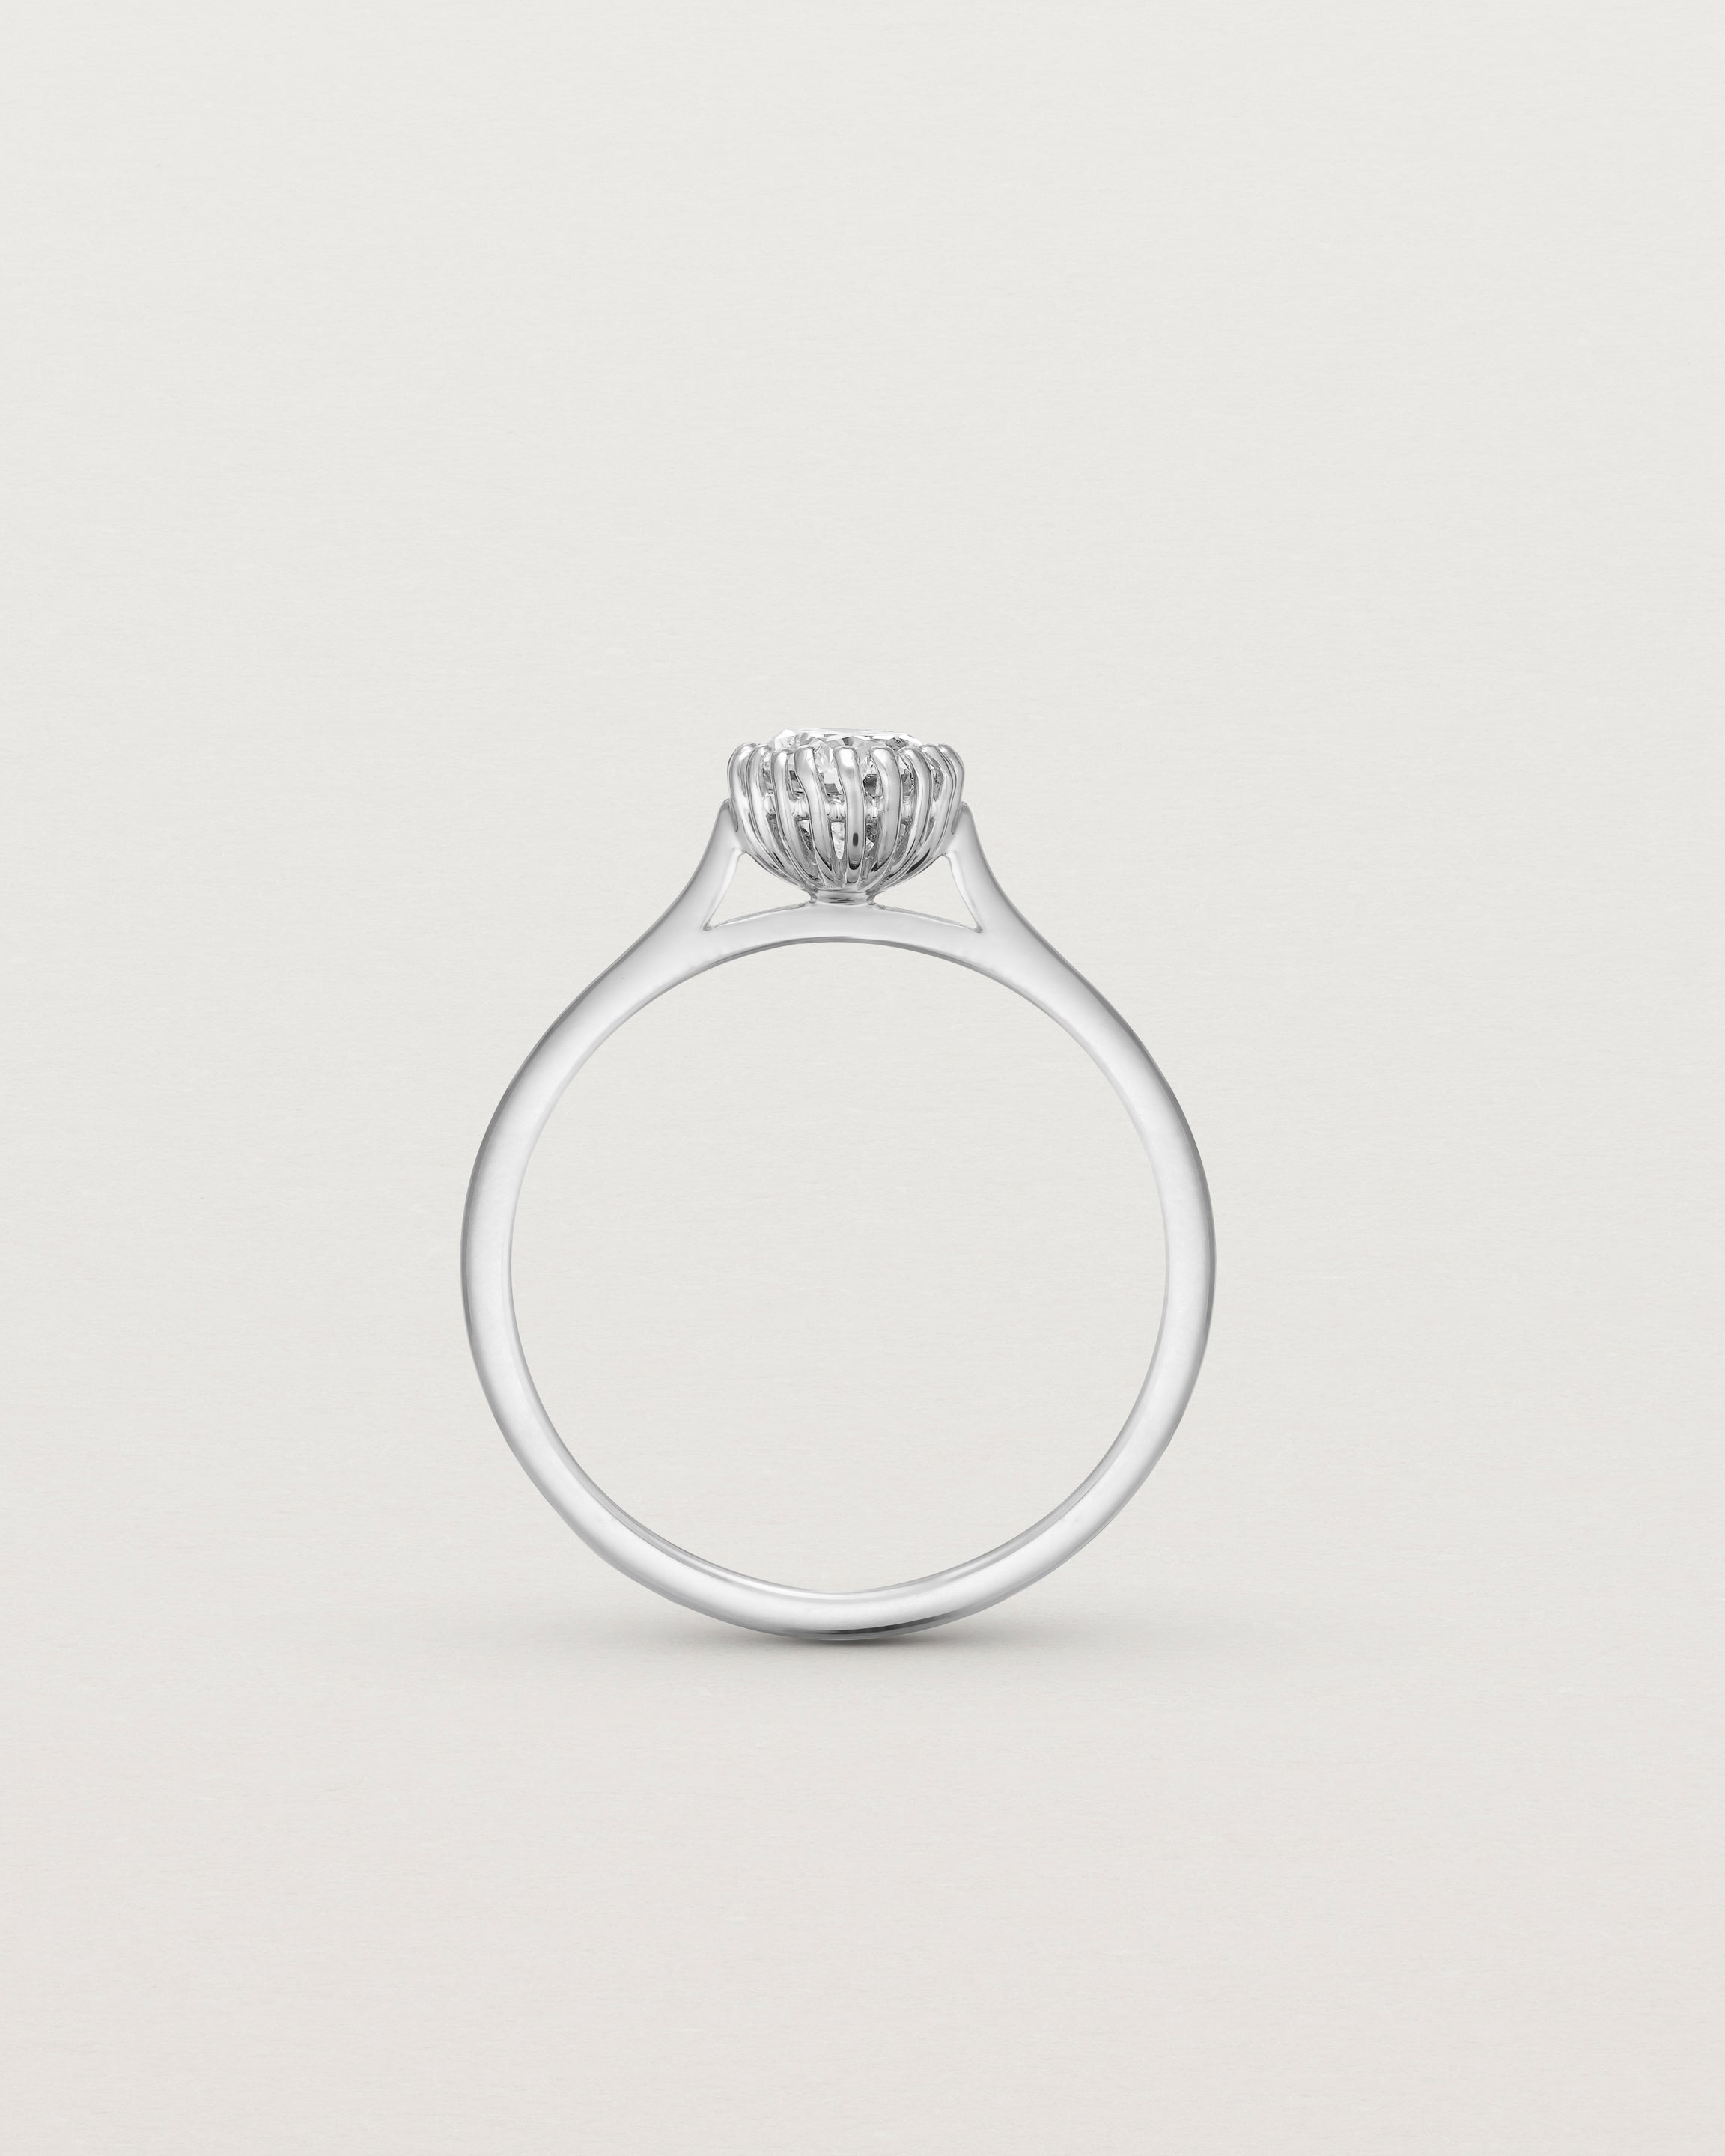 Standing view of the Meroë Oval Solitaire | Laboratory Grown Diamond in white gold.